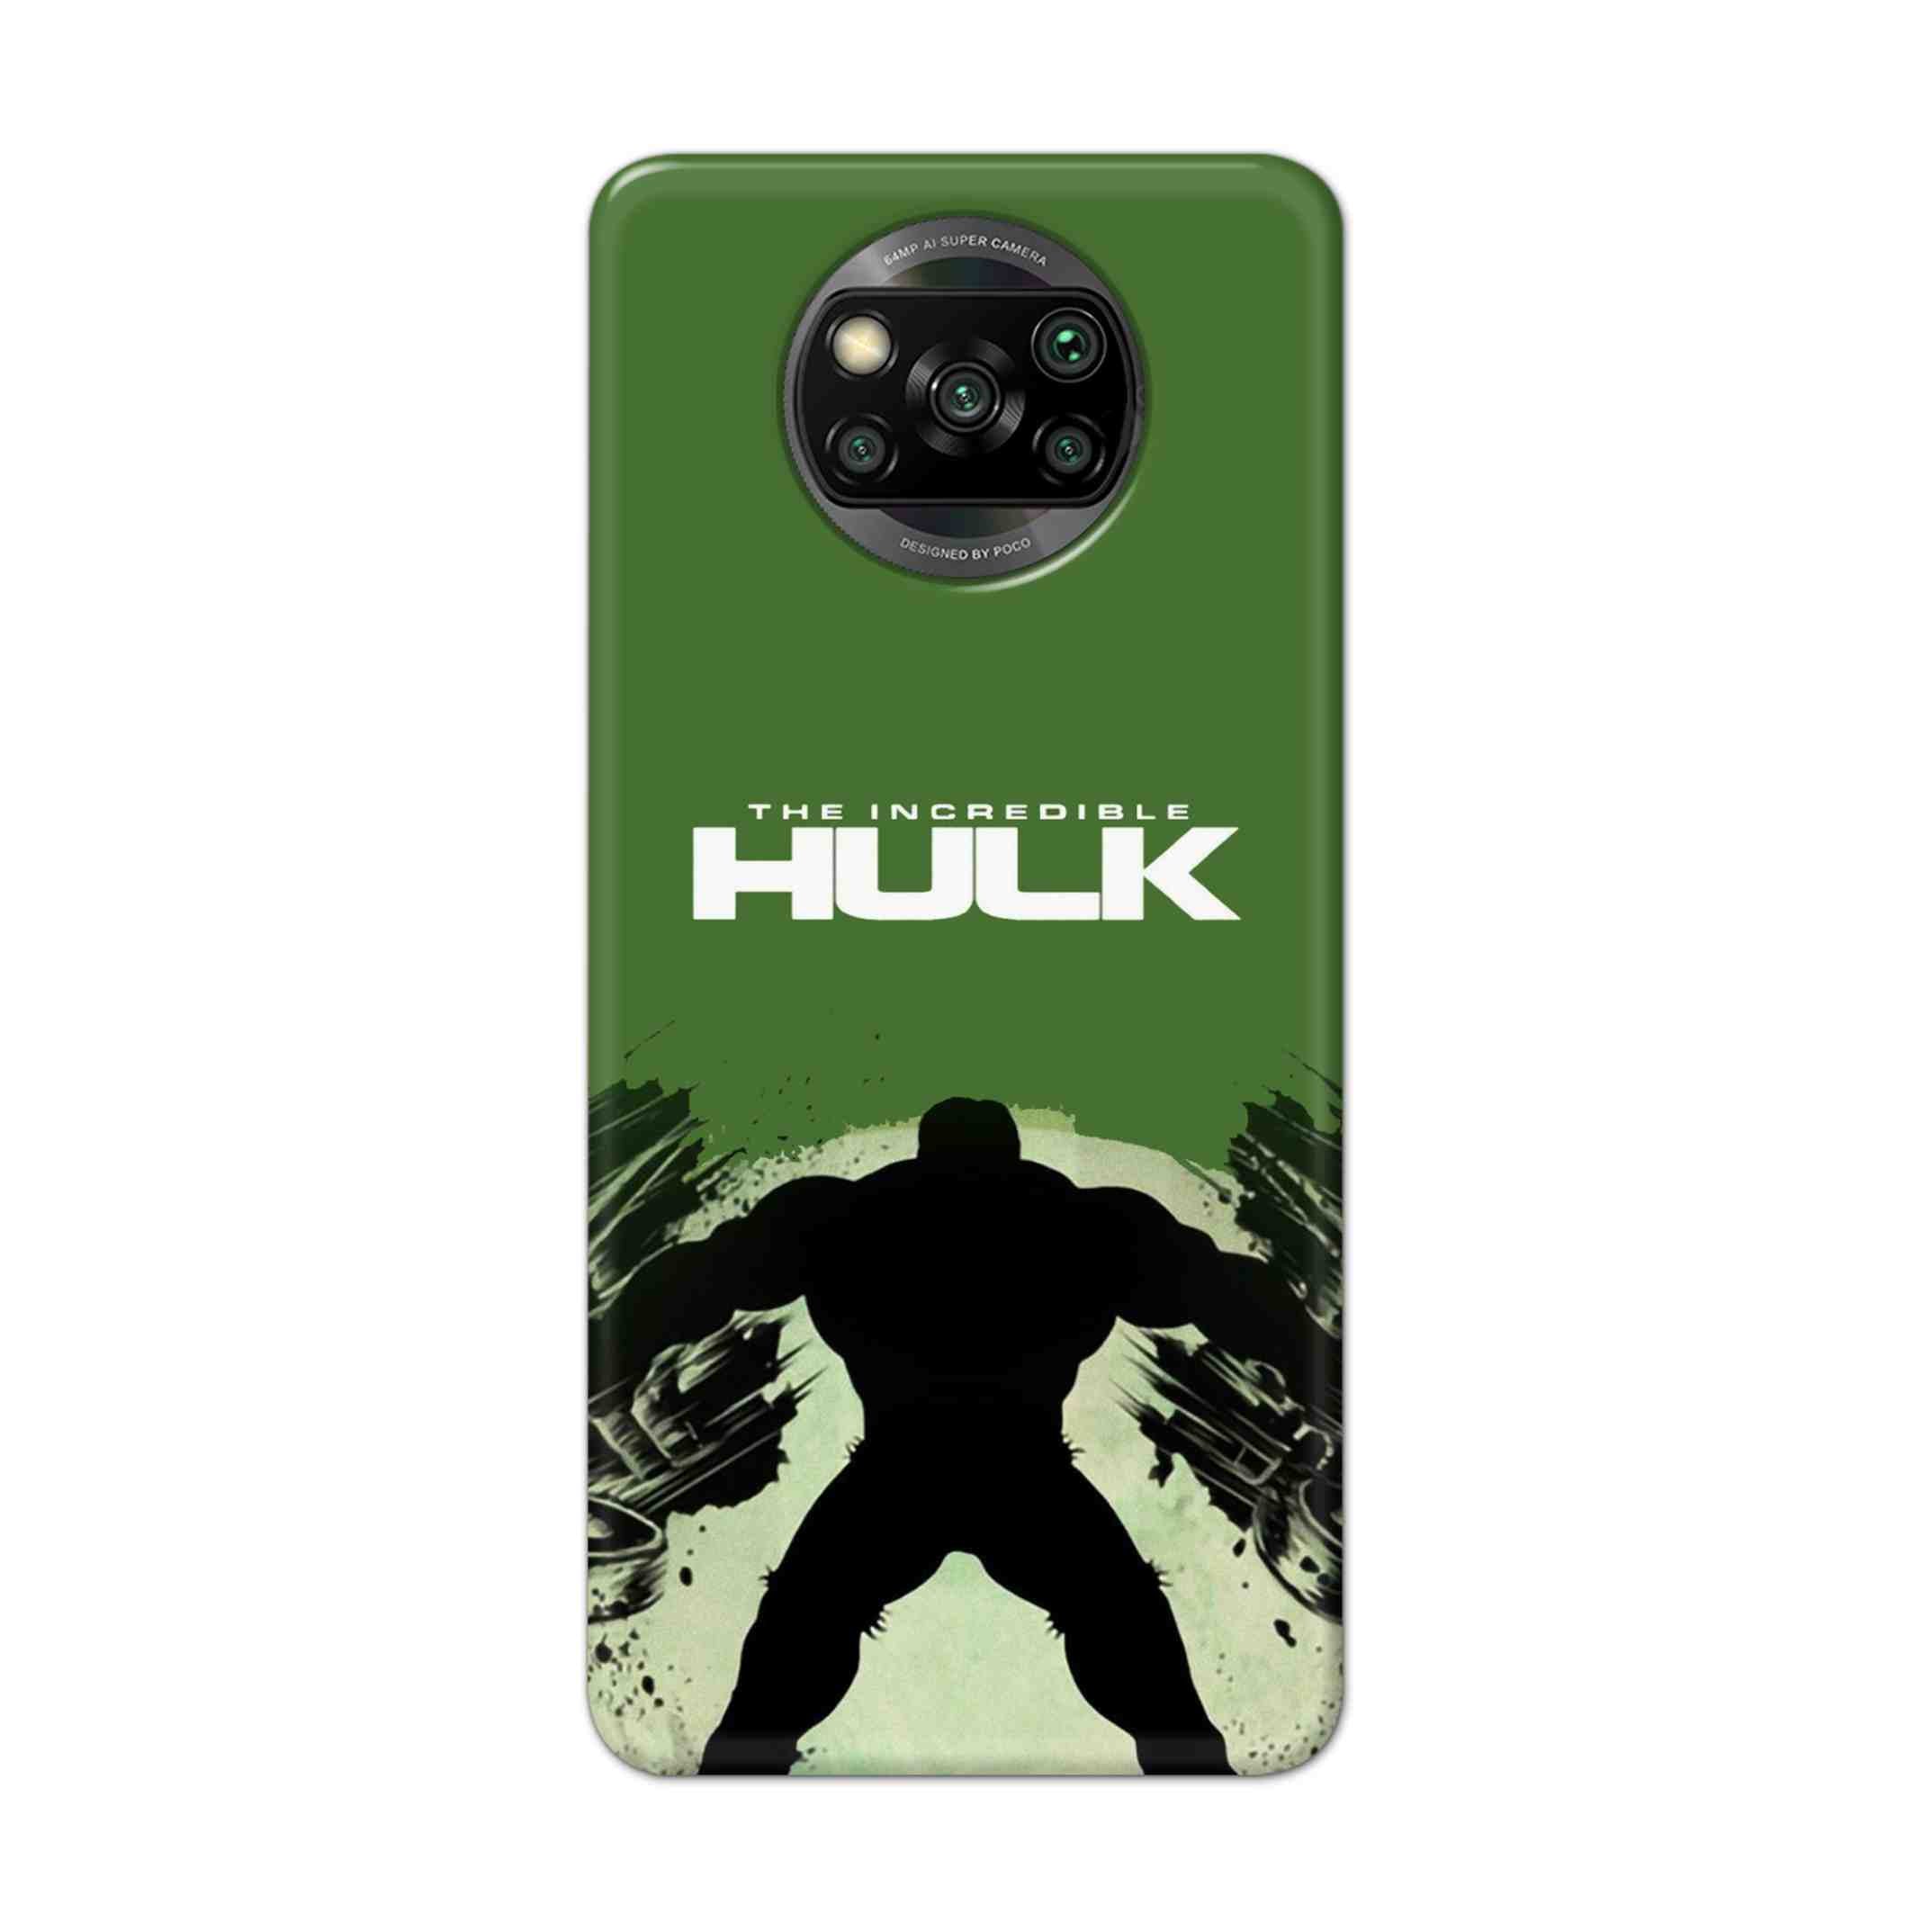 Buy Hulk Hard Back Mobile Phone Case Cover For Pcoc X3 NFC Online